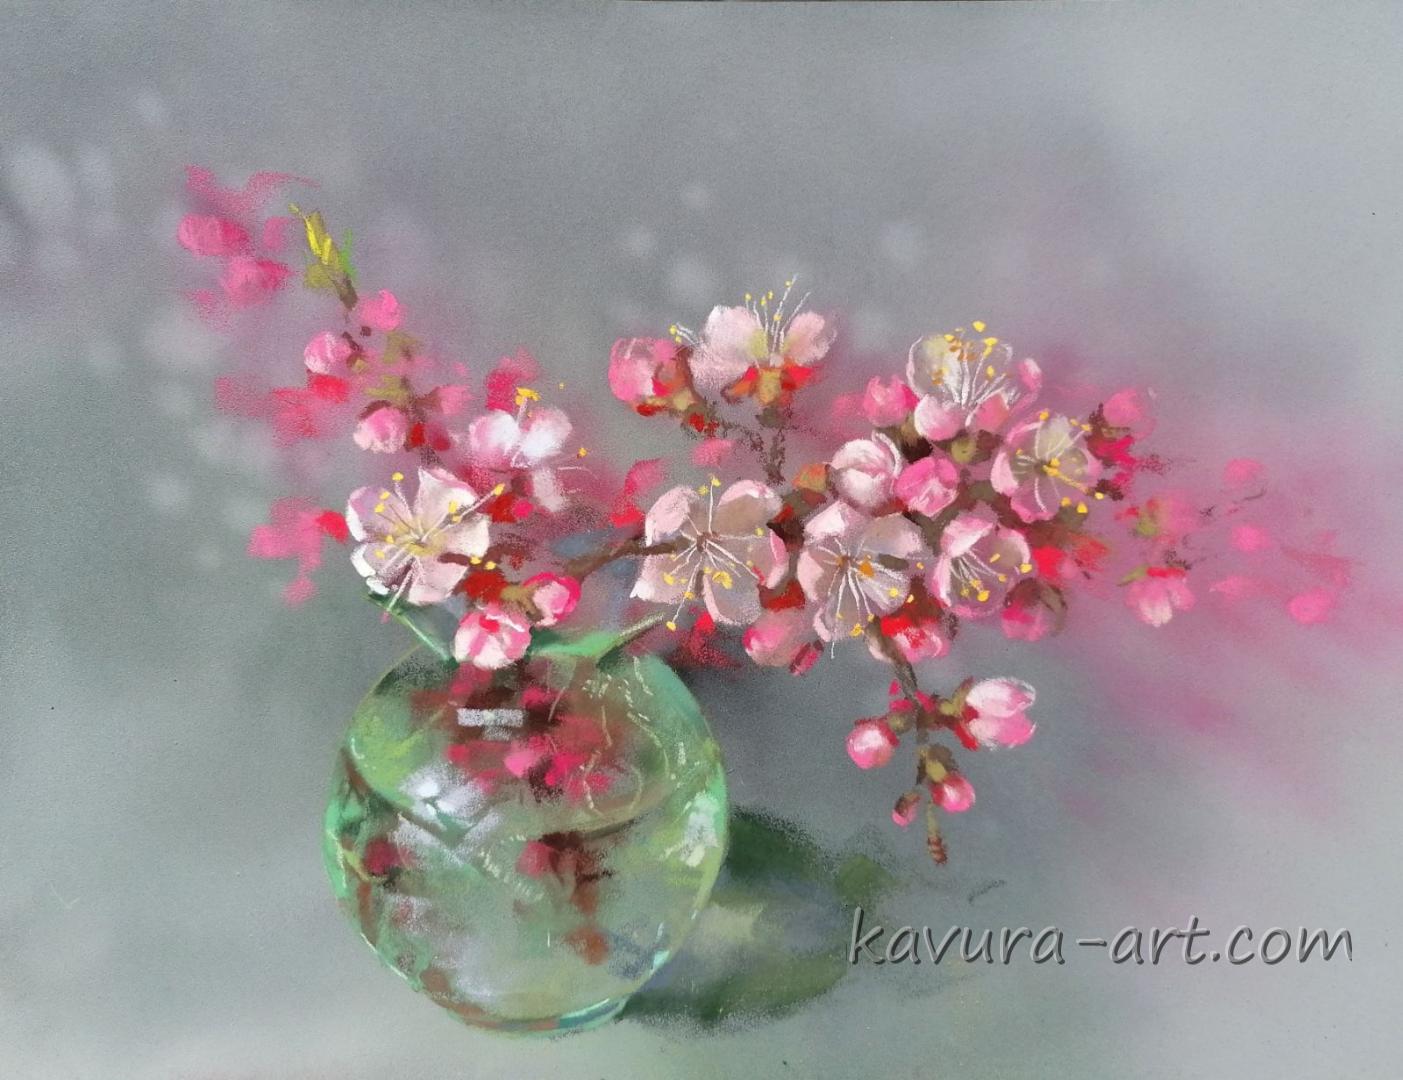 "Apricot blossom" Pastel on paper.